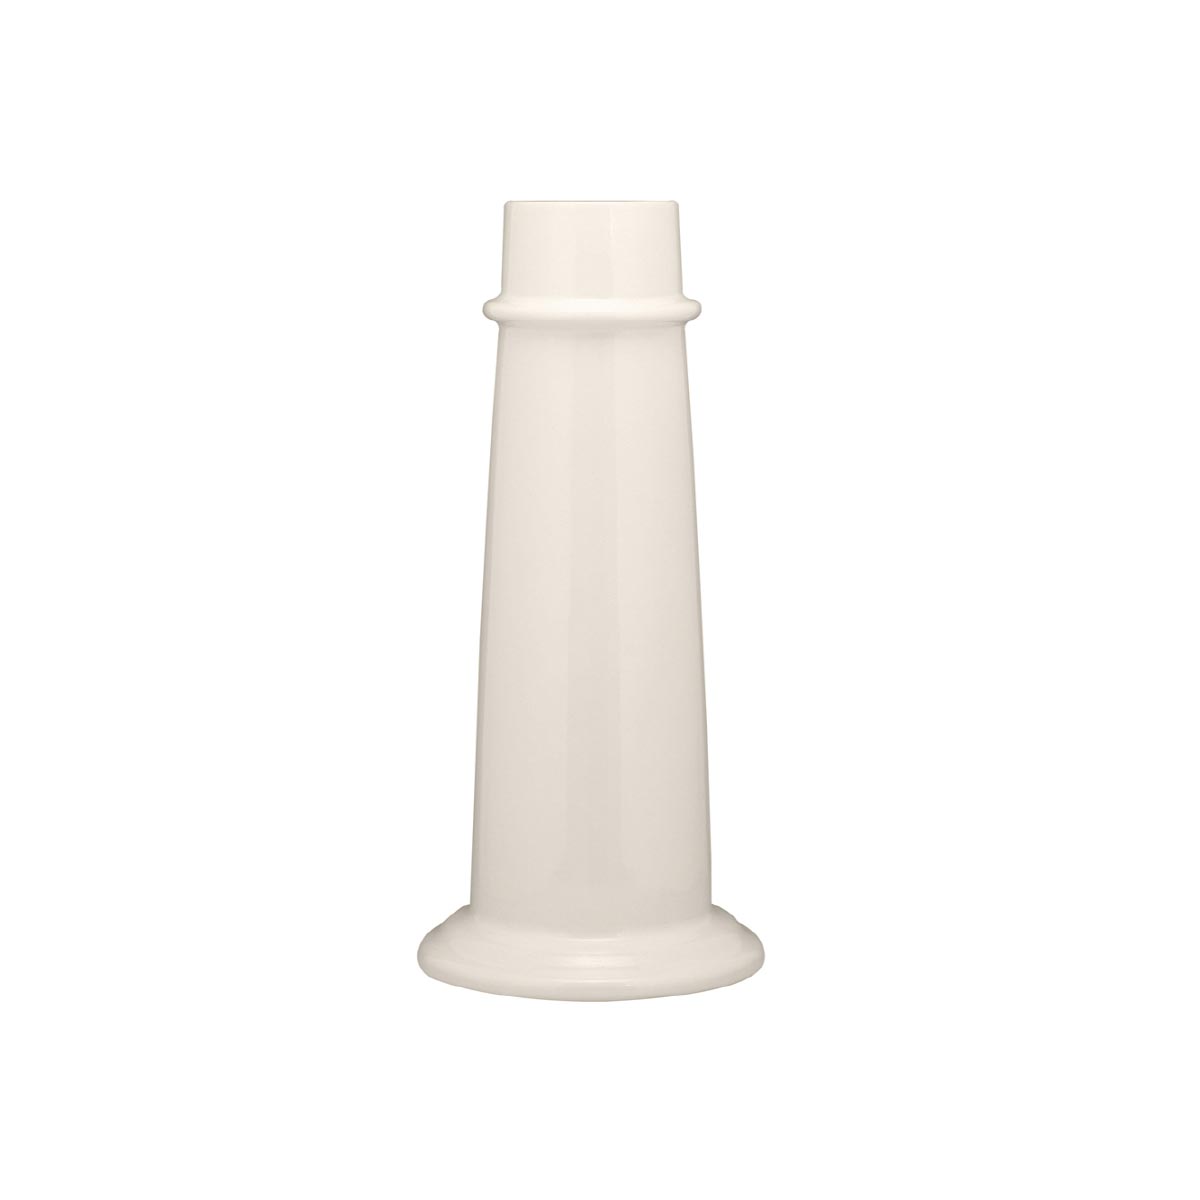 American Standard 0067000.222 Pedestal Only, 13 in W x 28-1/2 in H Leg, Vitreous China, Import